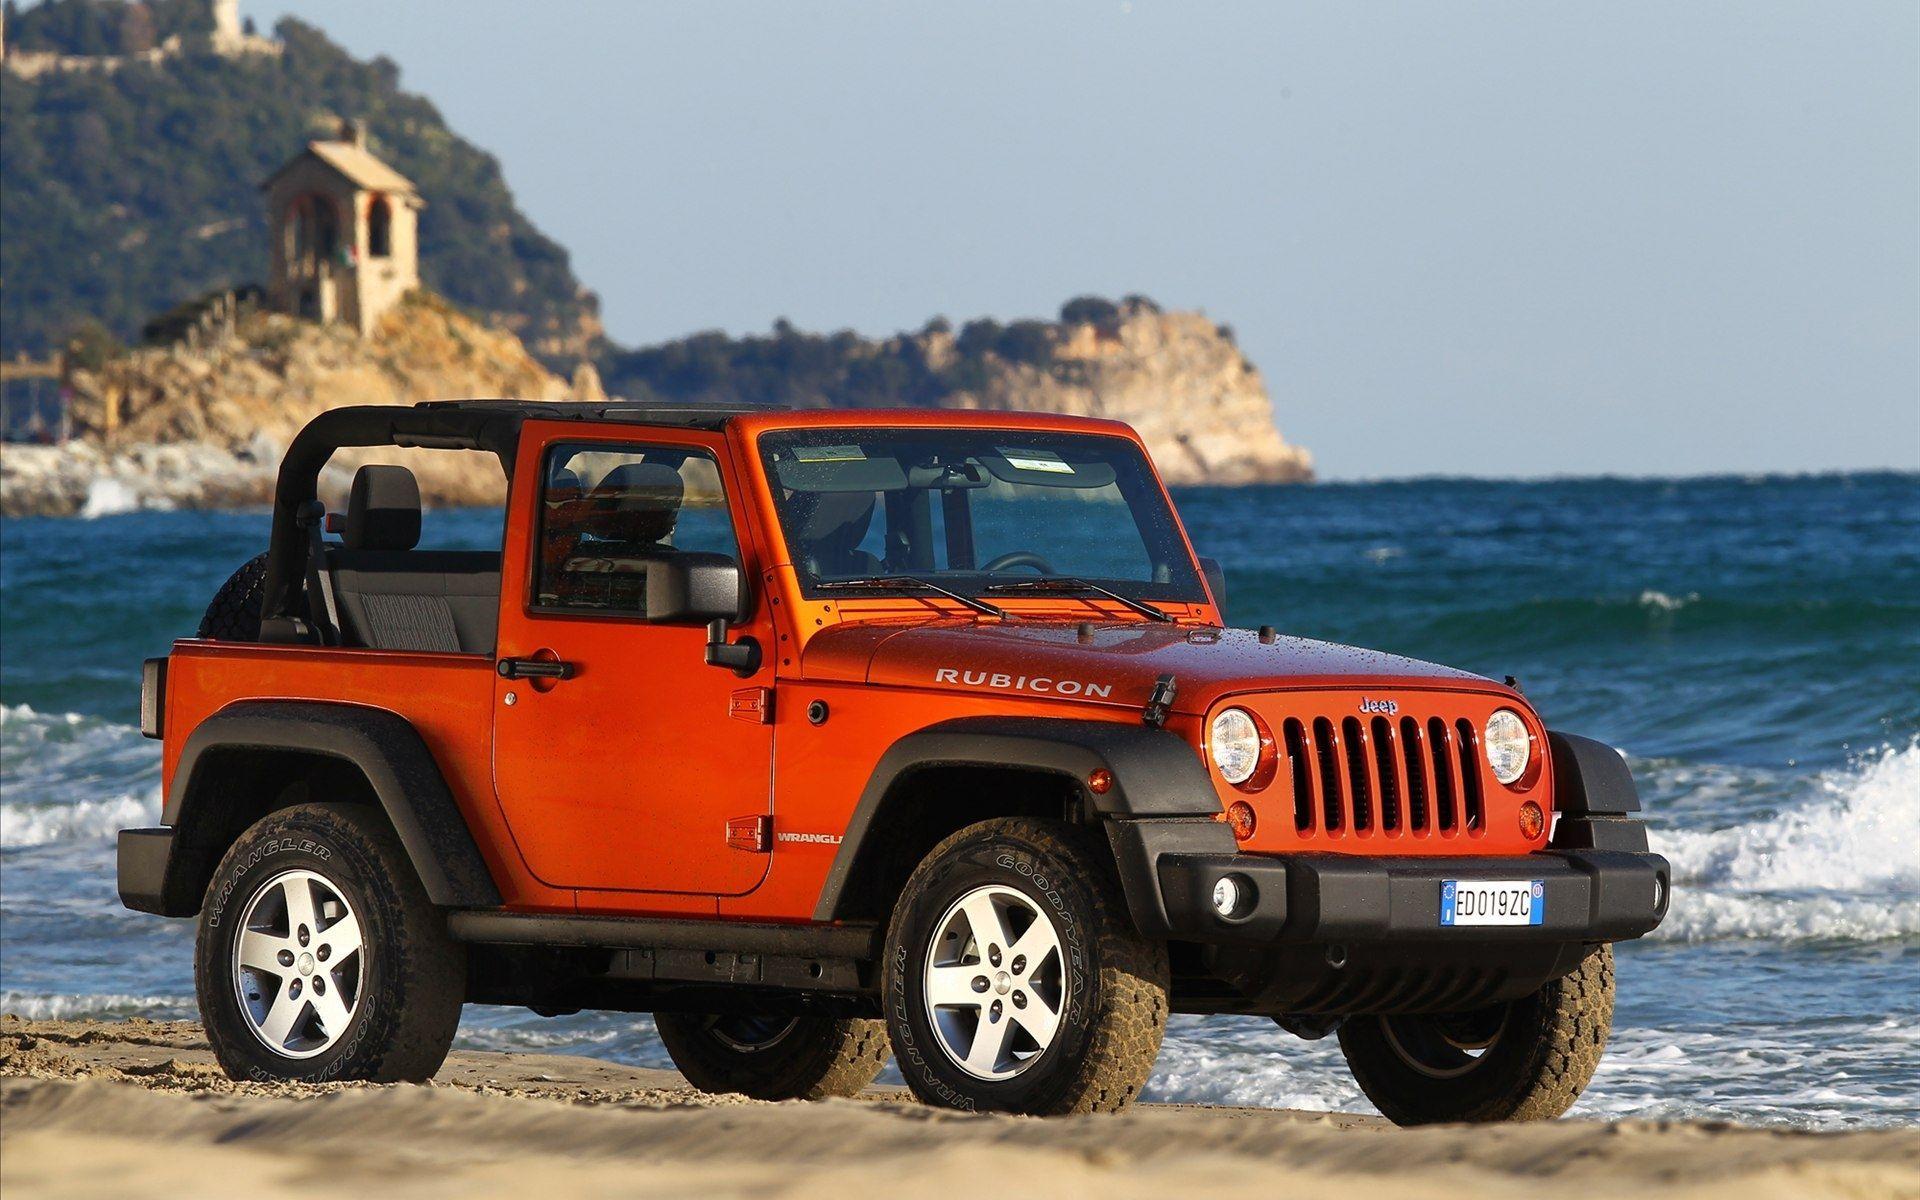 Red Jeep Wallpapers - Top Free Red Jeep Backgrounds - WallpaperAccess